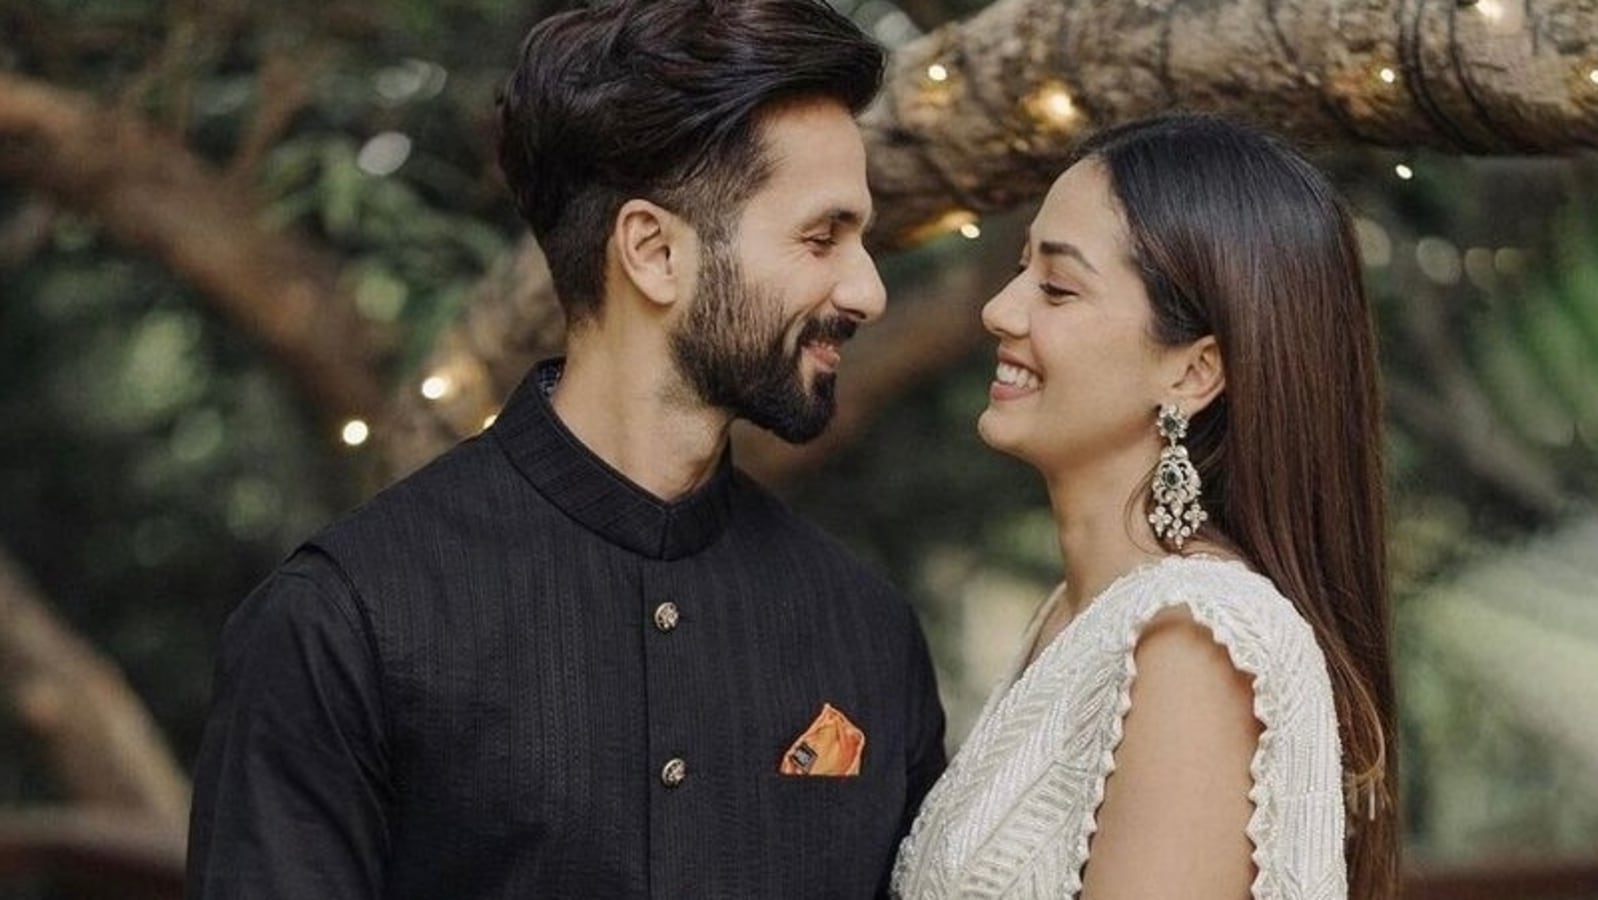 Shahid Kapoor reacts as wife Mira Rajput becomes face of haircare brand: ‘Proud’ | Bollywood